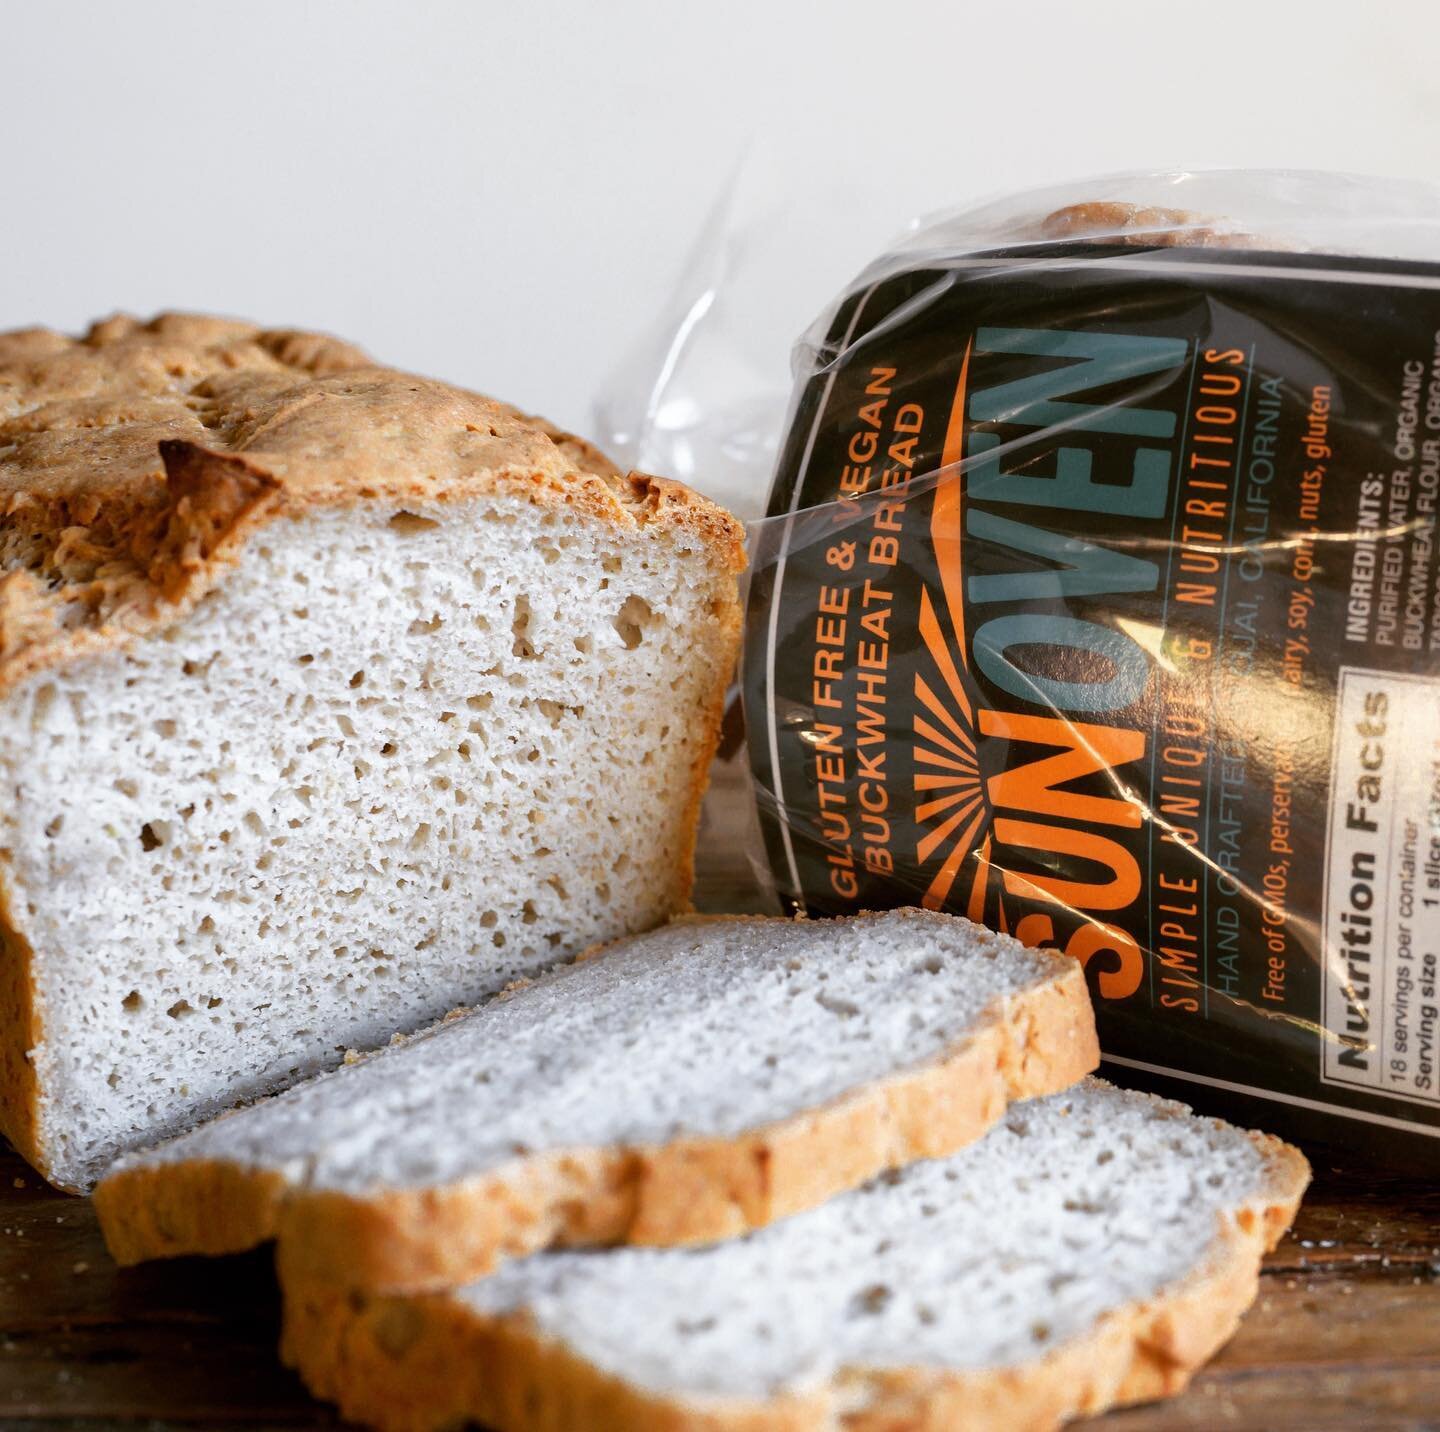 Did you know we bake one of the only gluten-free, vegan AND organic breads on the market? It&rsquo;s also nut-free, soy-free, preservative-free and nutrient-dense. And&hellip;drumroll please&hellip;it&rsquo;s delicious too! 

Fresh bread is available